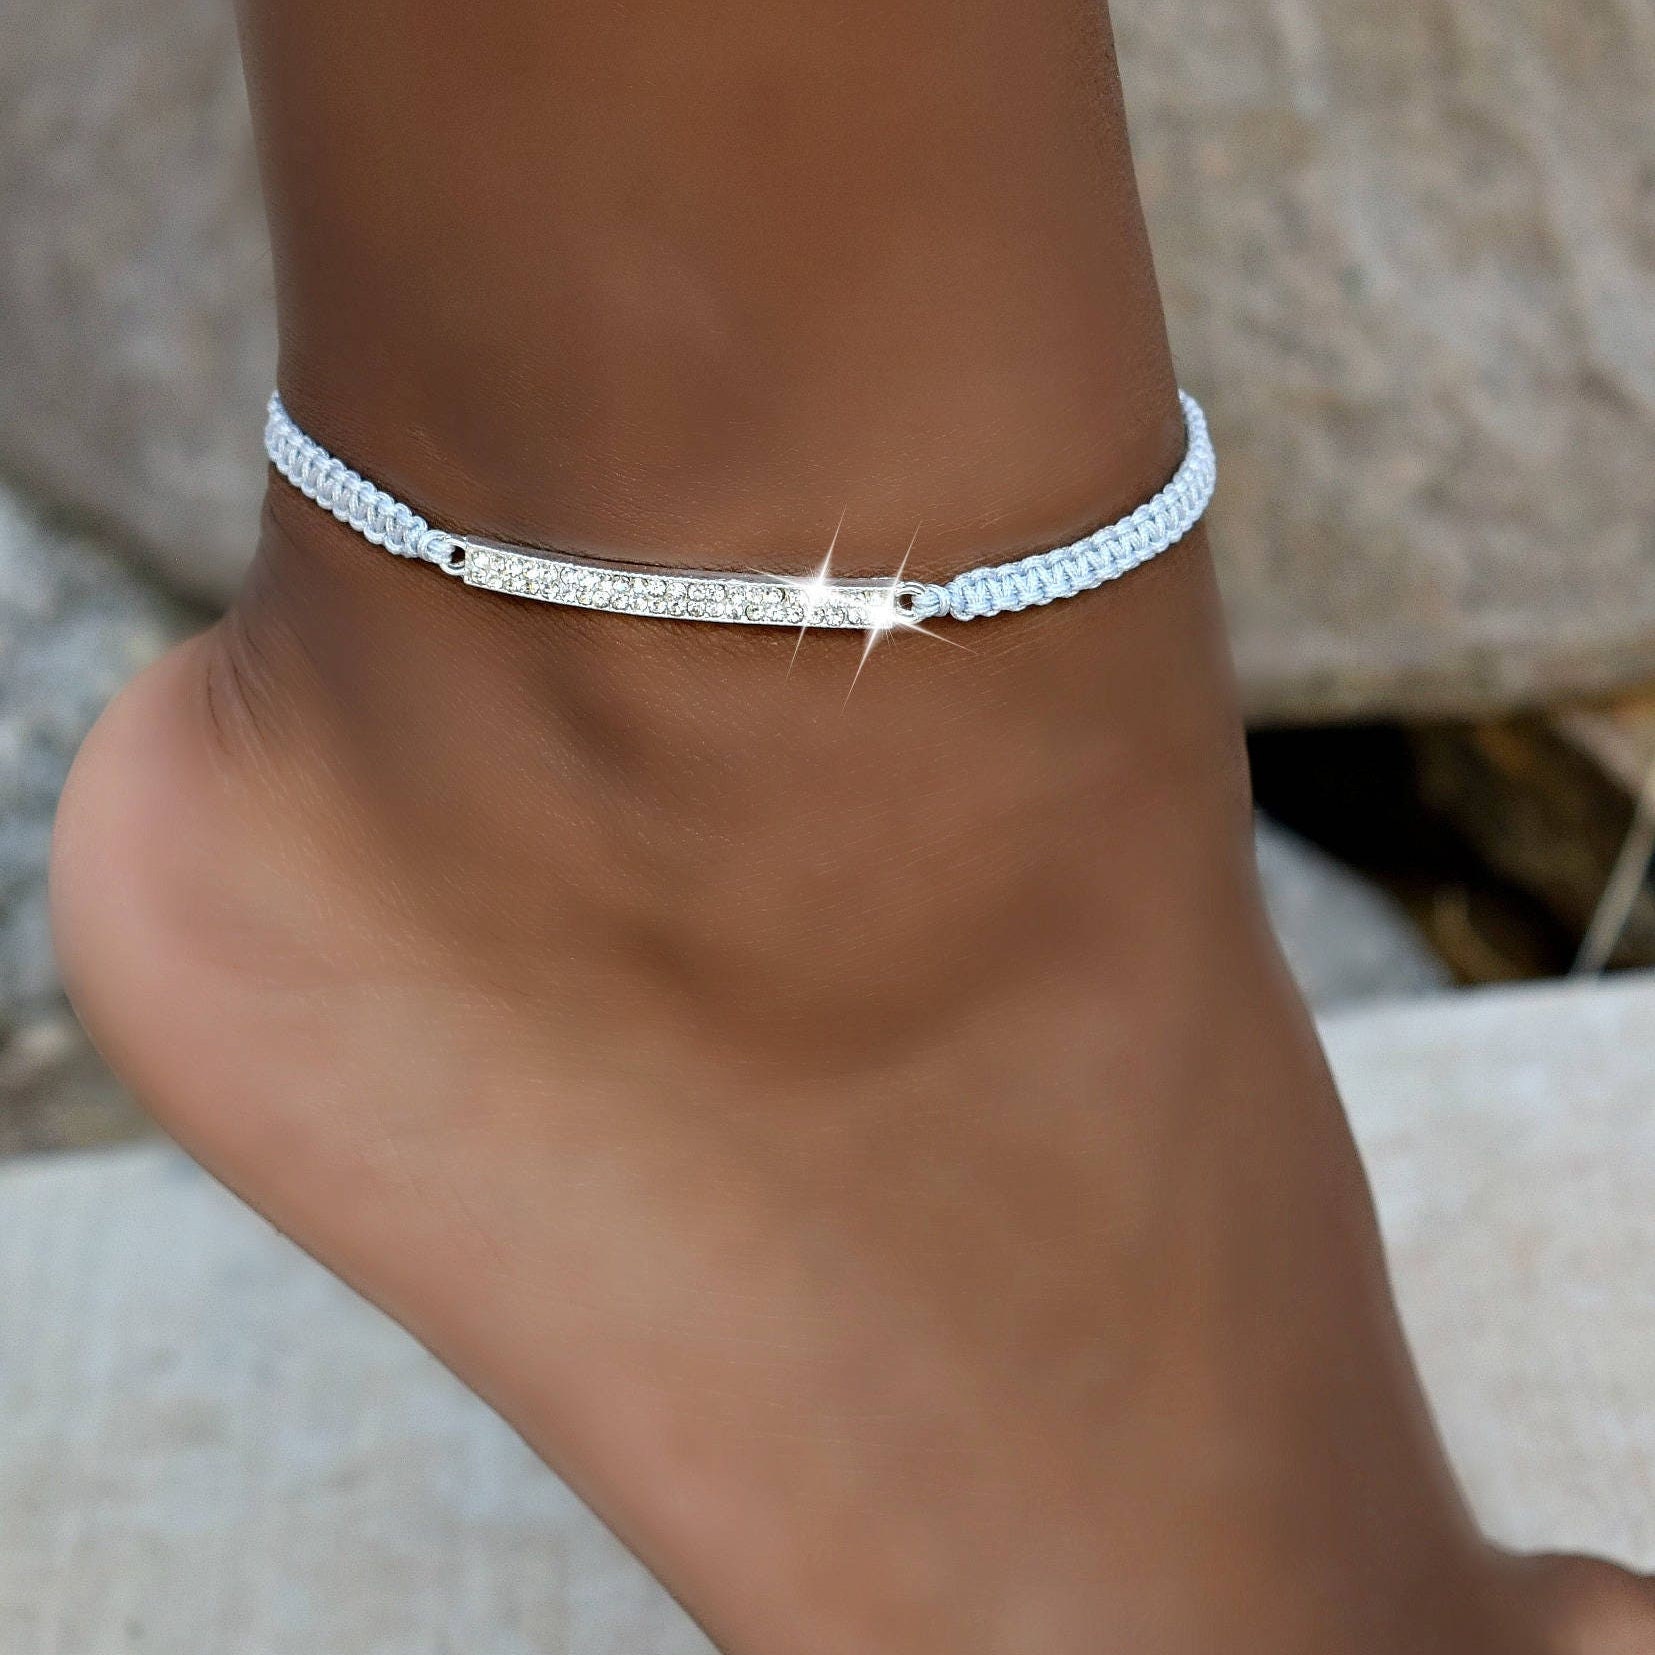 How to Wear an Anklet? - Alexis Jae Jewelry